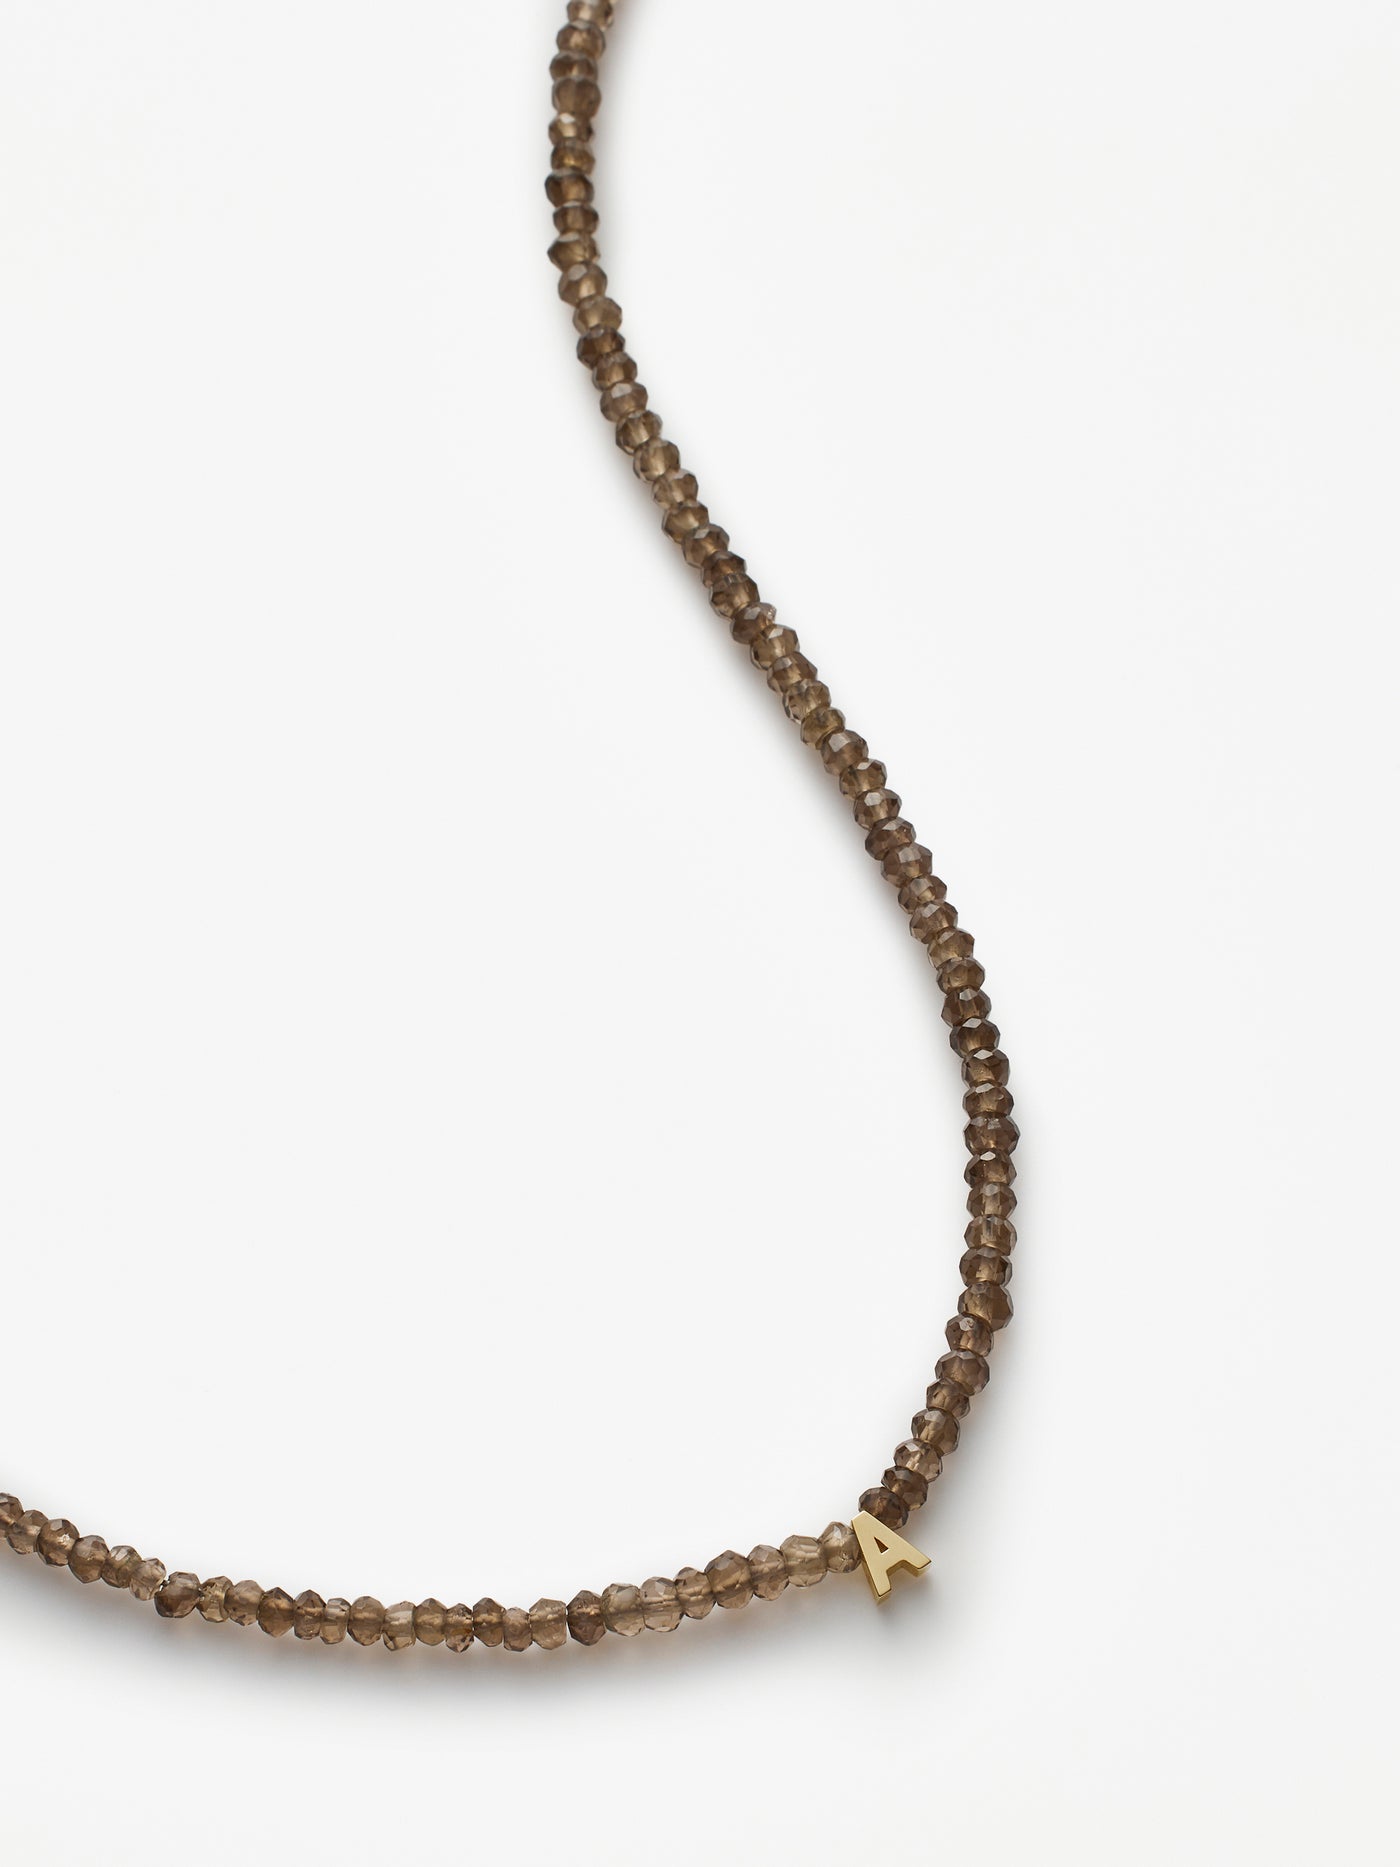 Hand-strung necklace with natural, faceted smoky quartz gemstones and miniature three-dimensional letter in 18k solid gold